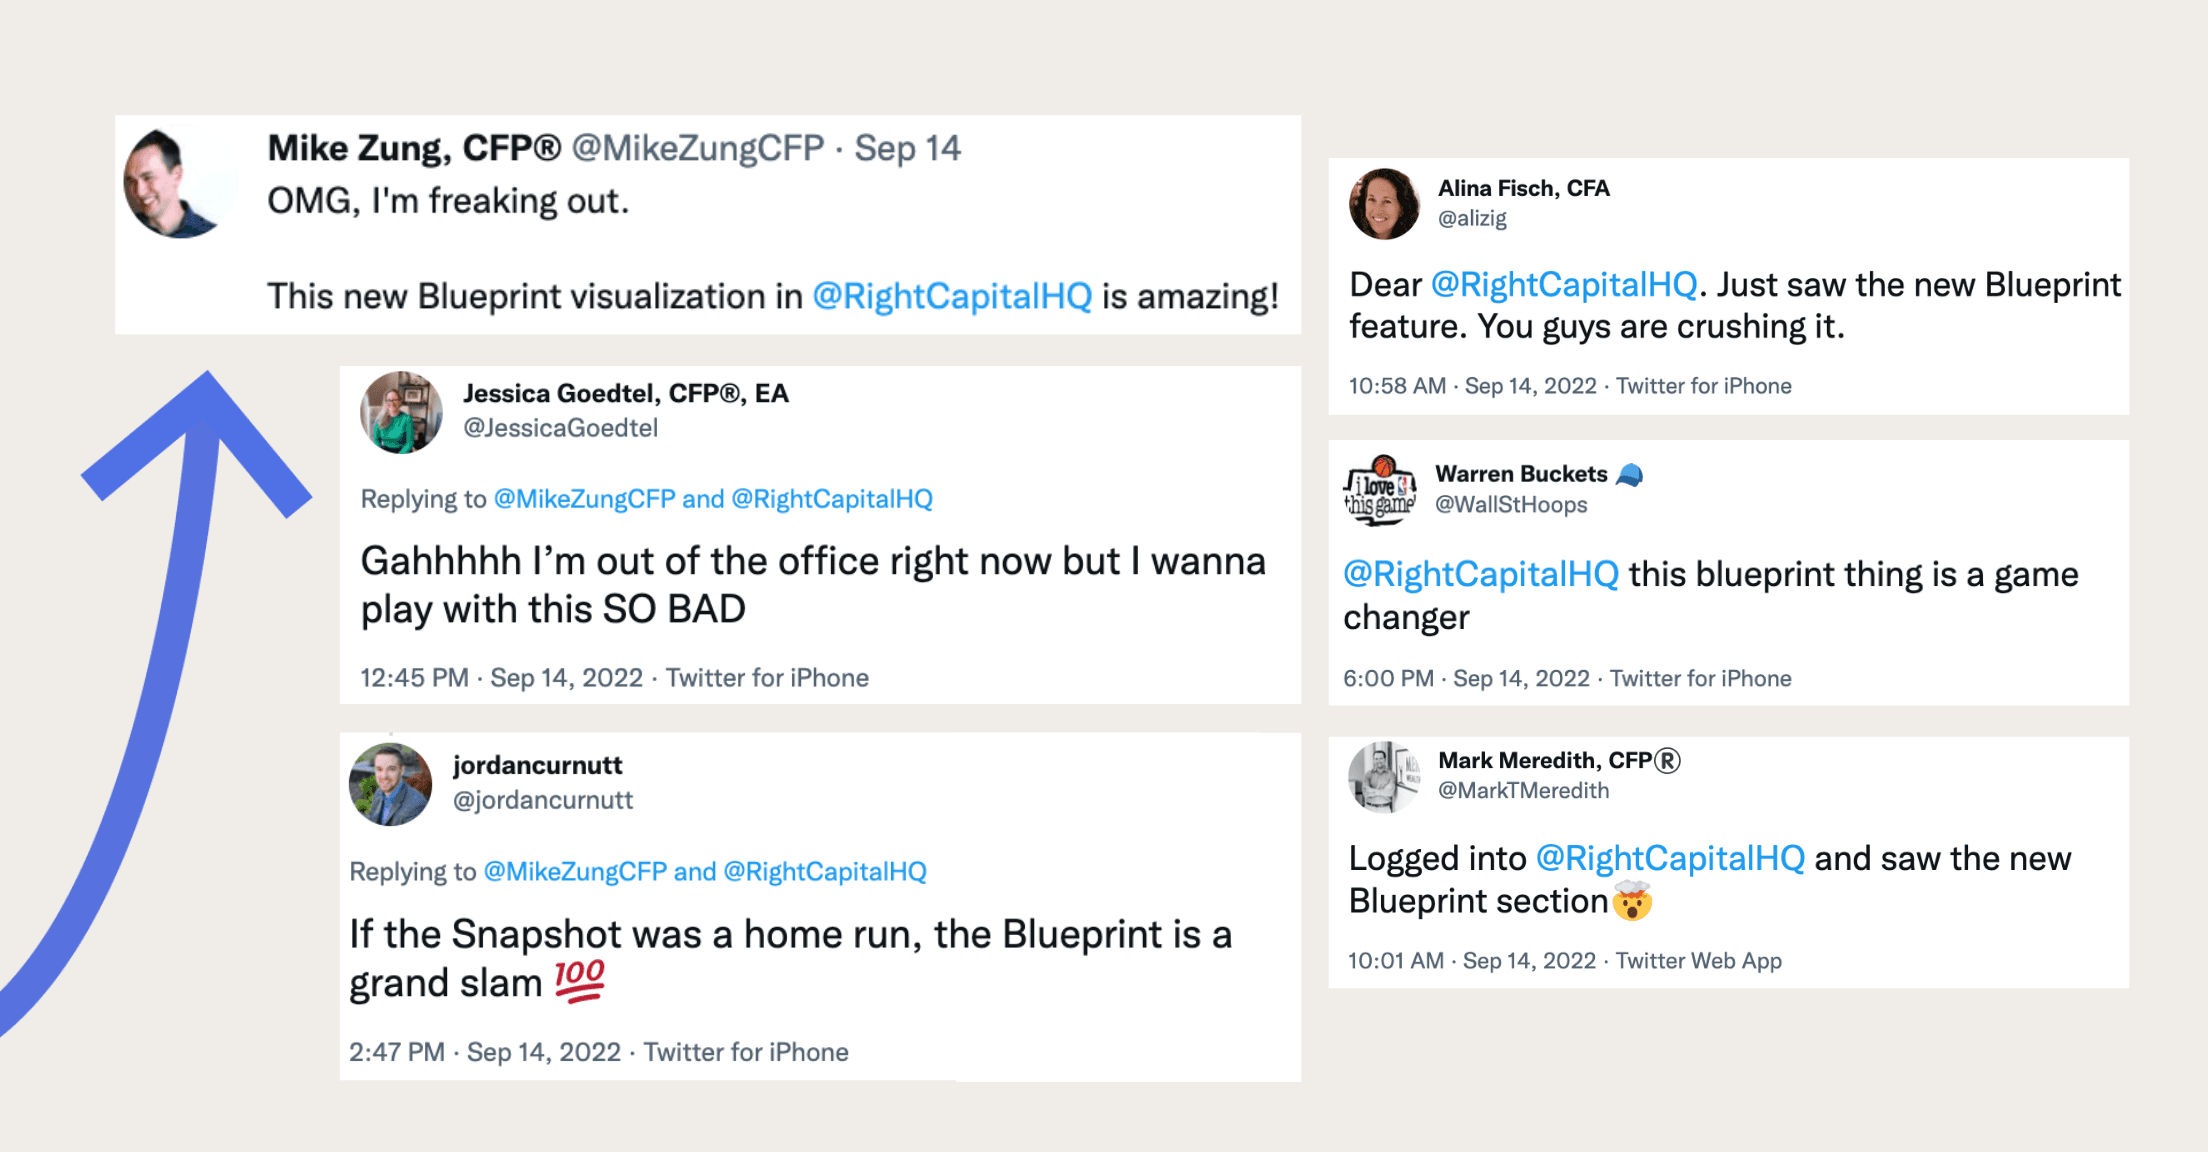 Screenshots of tweets from advisors getting excited about RightCapital's Blueprint feature